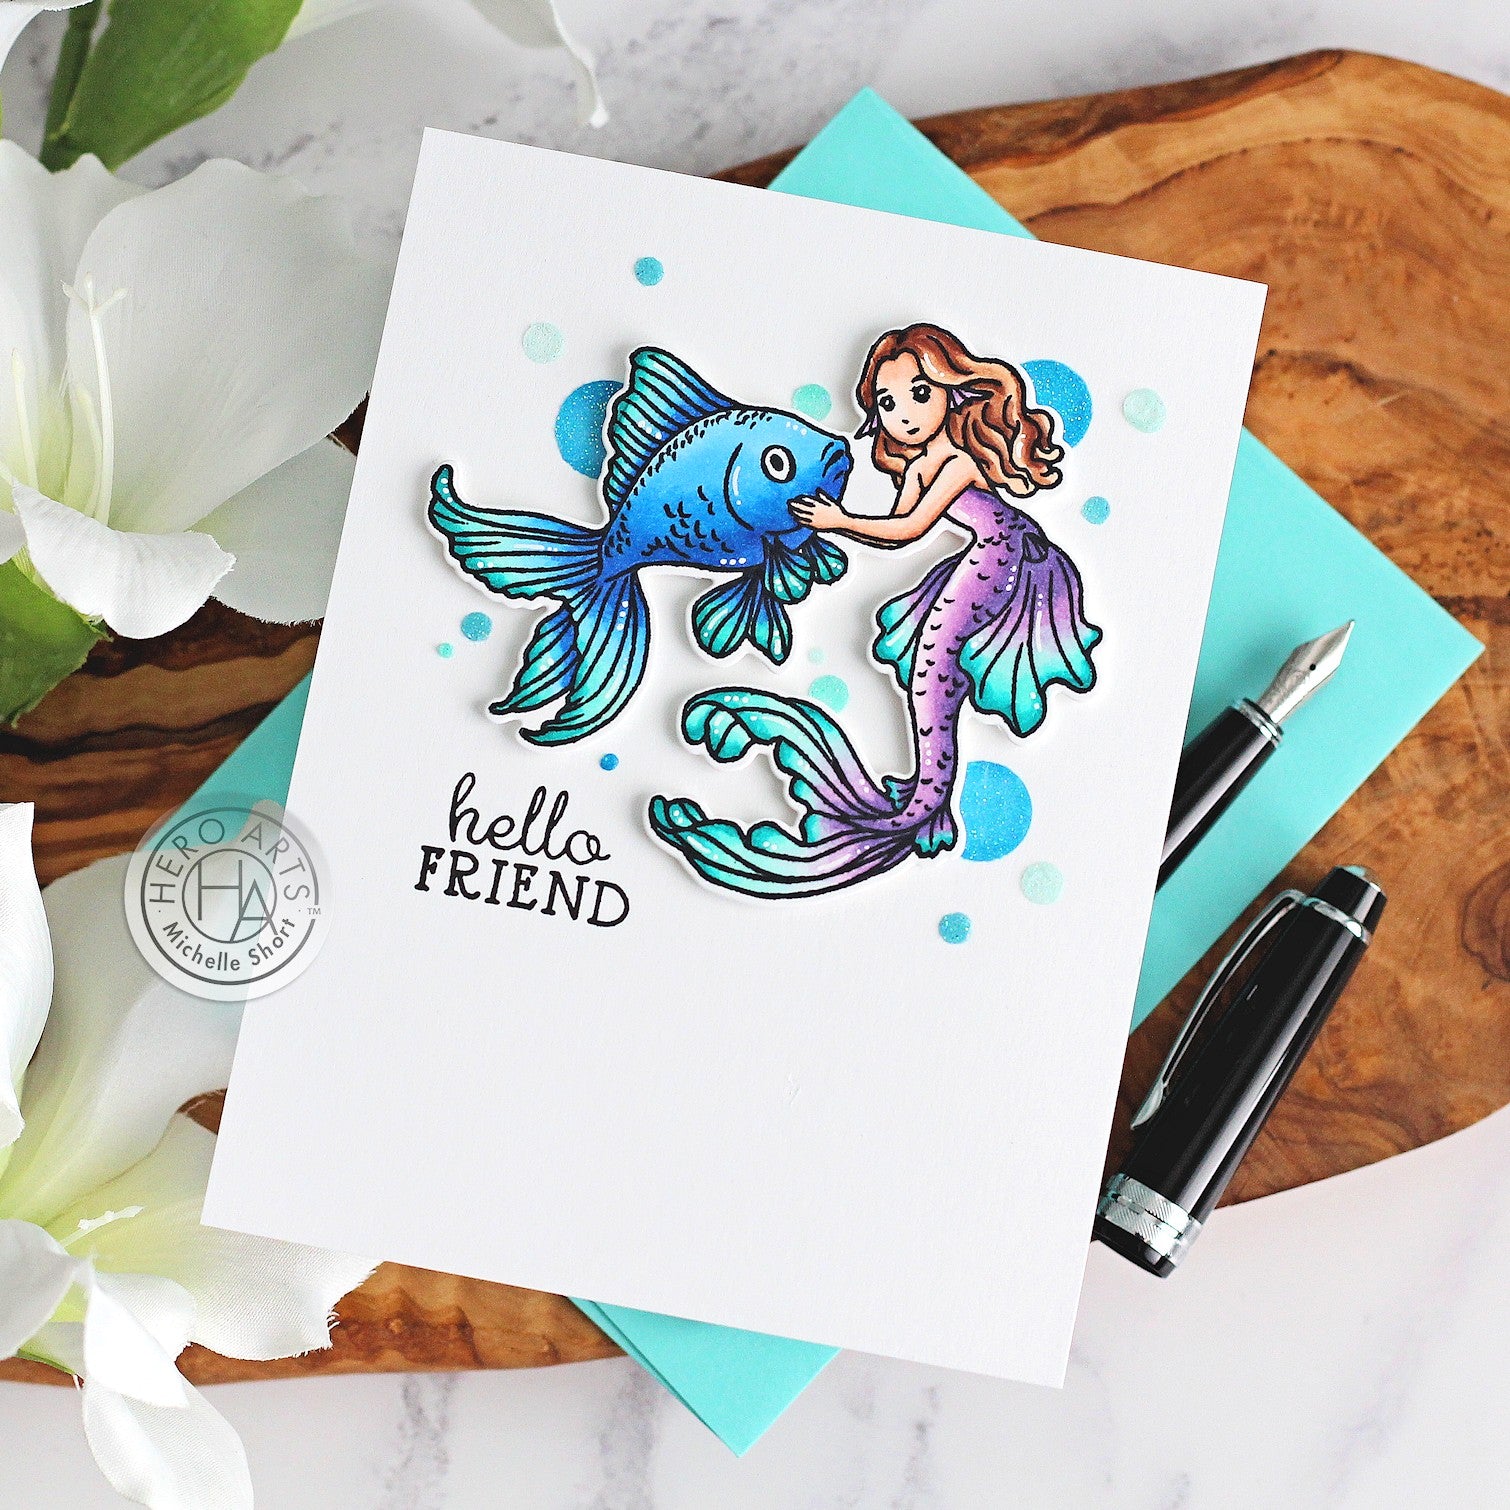 Hello Friend by Michelle Short for Hero Arts